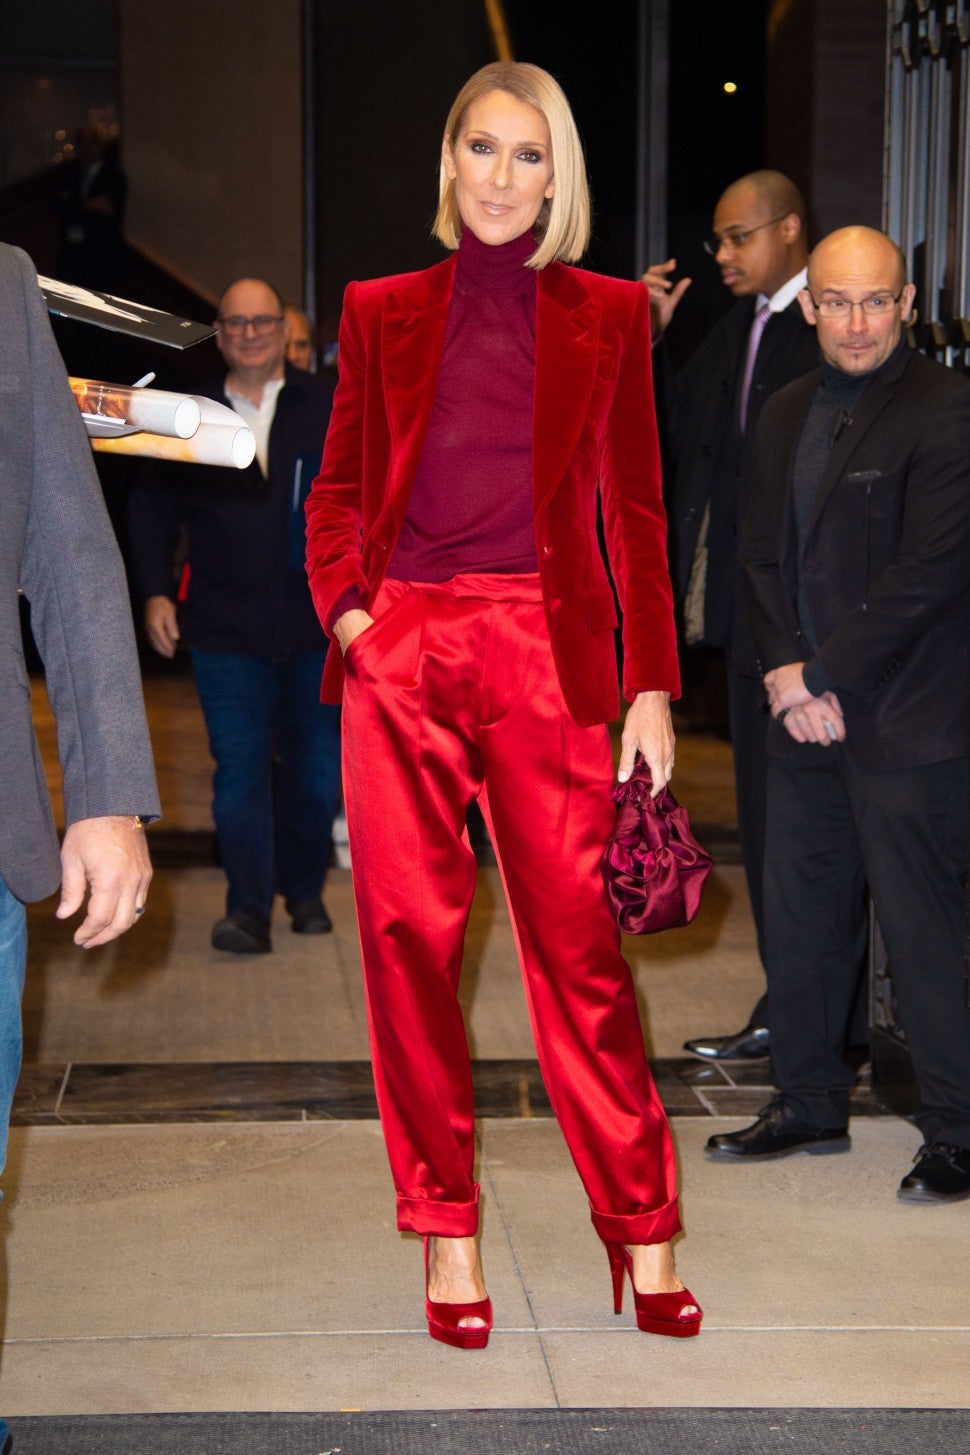 Celine Dion in red outfit